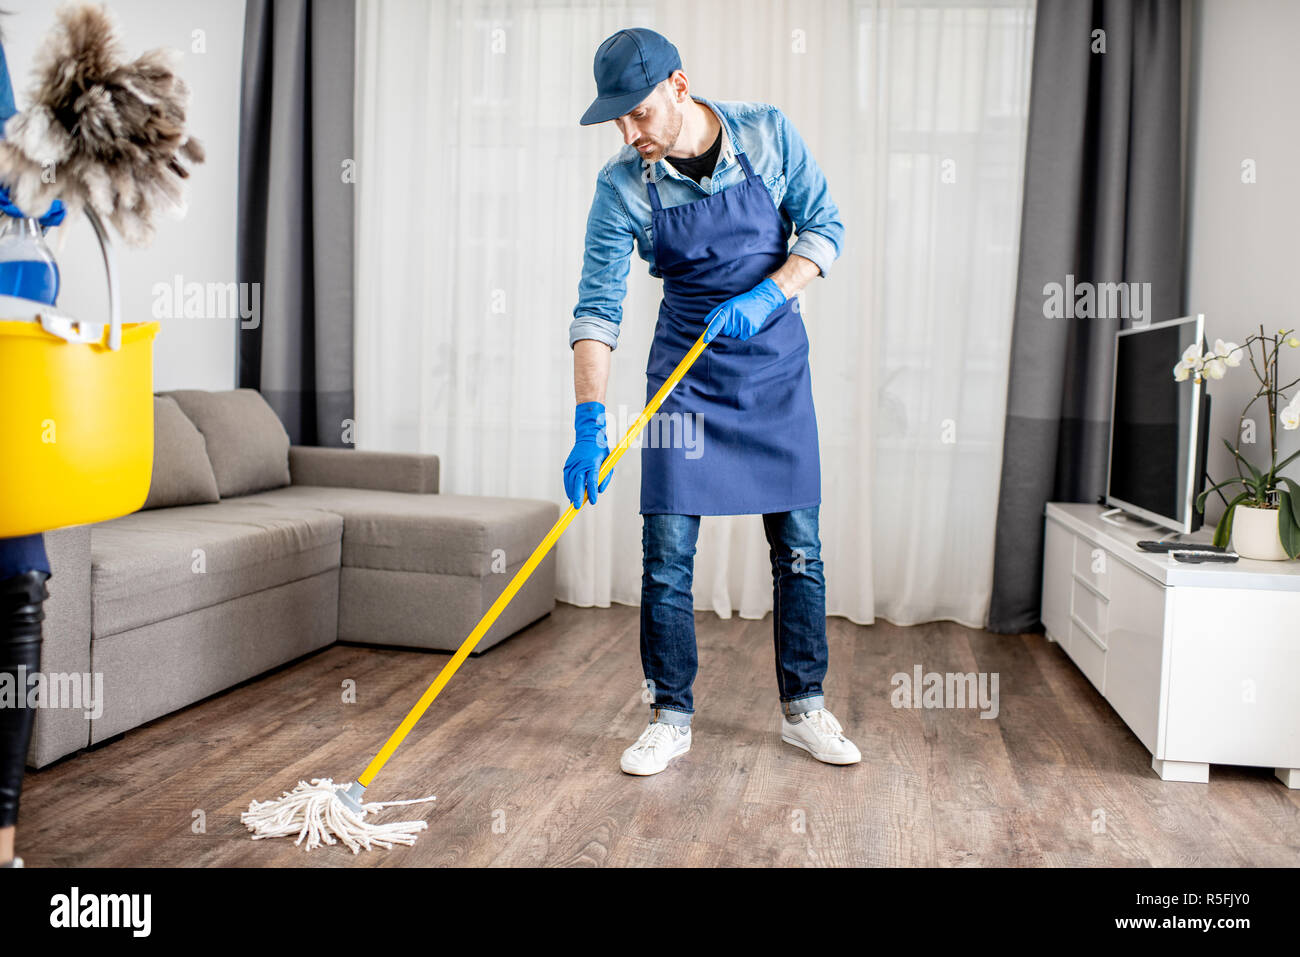 Man as a professional cleaner dressed in the blue uniform washing floor with mopping stick in the apartment Stock Photo